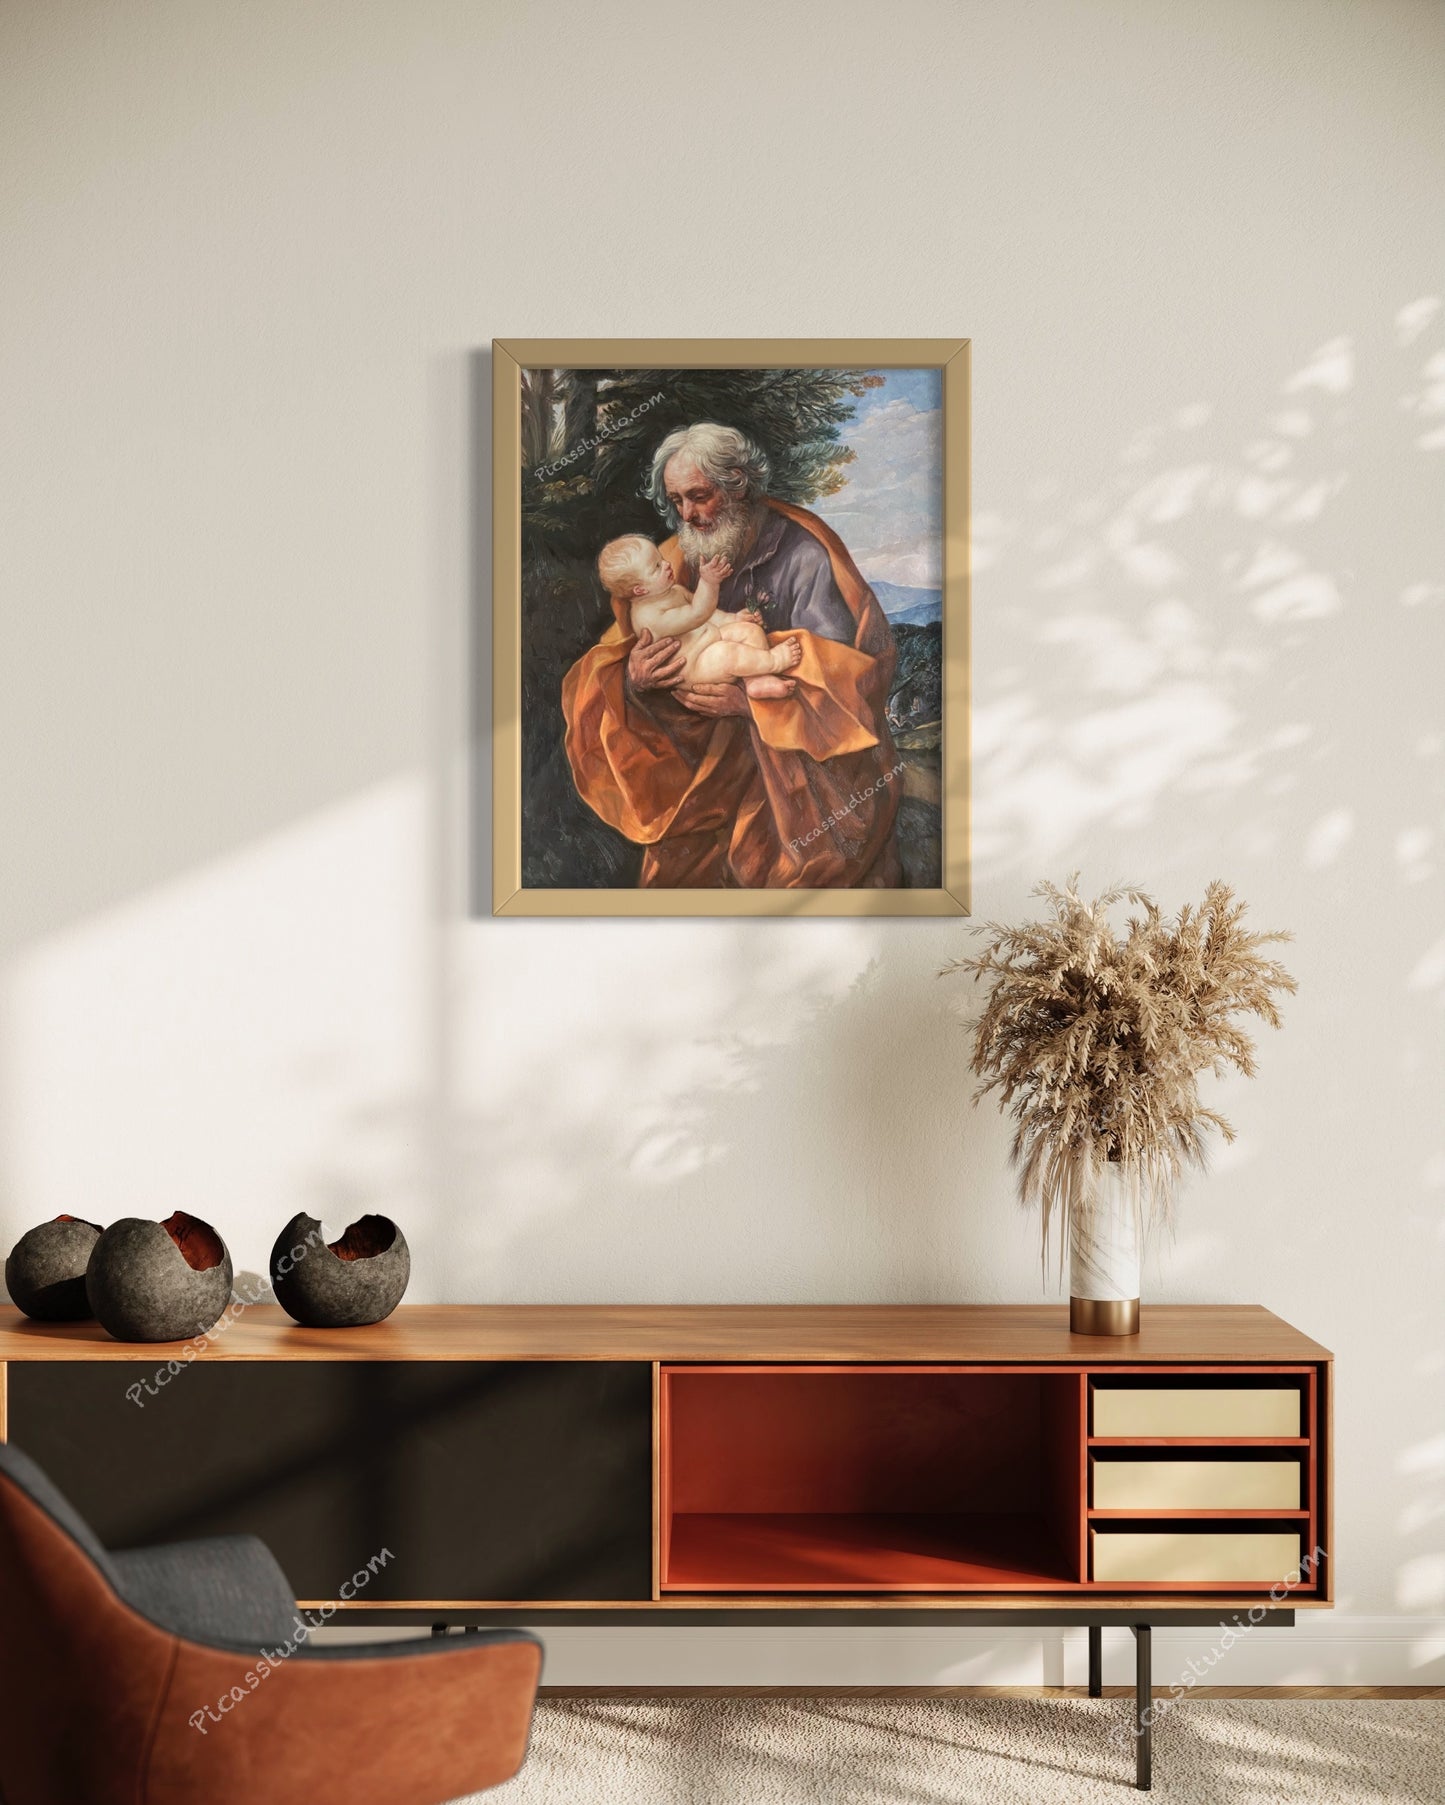 Saint Joseph with the Infant Jesus by Guido Reni, c 1635 Oil Painting Hand Painted Art on Canvas Wall Decor Unframed